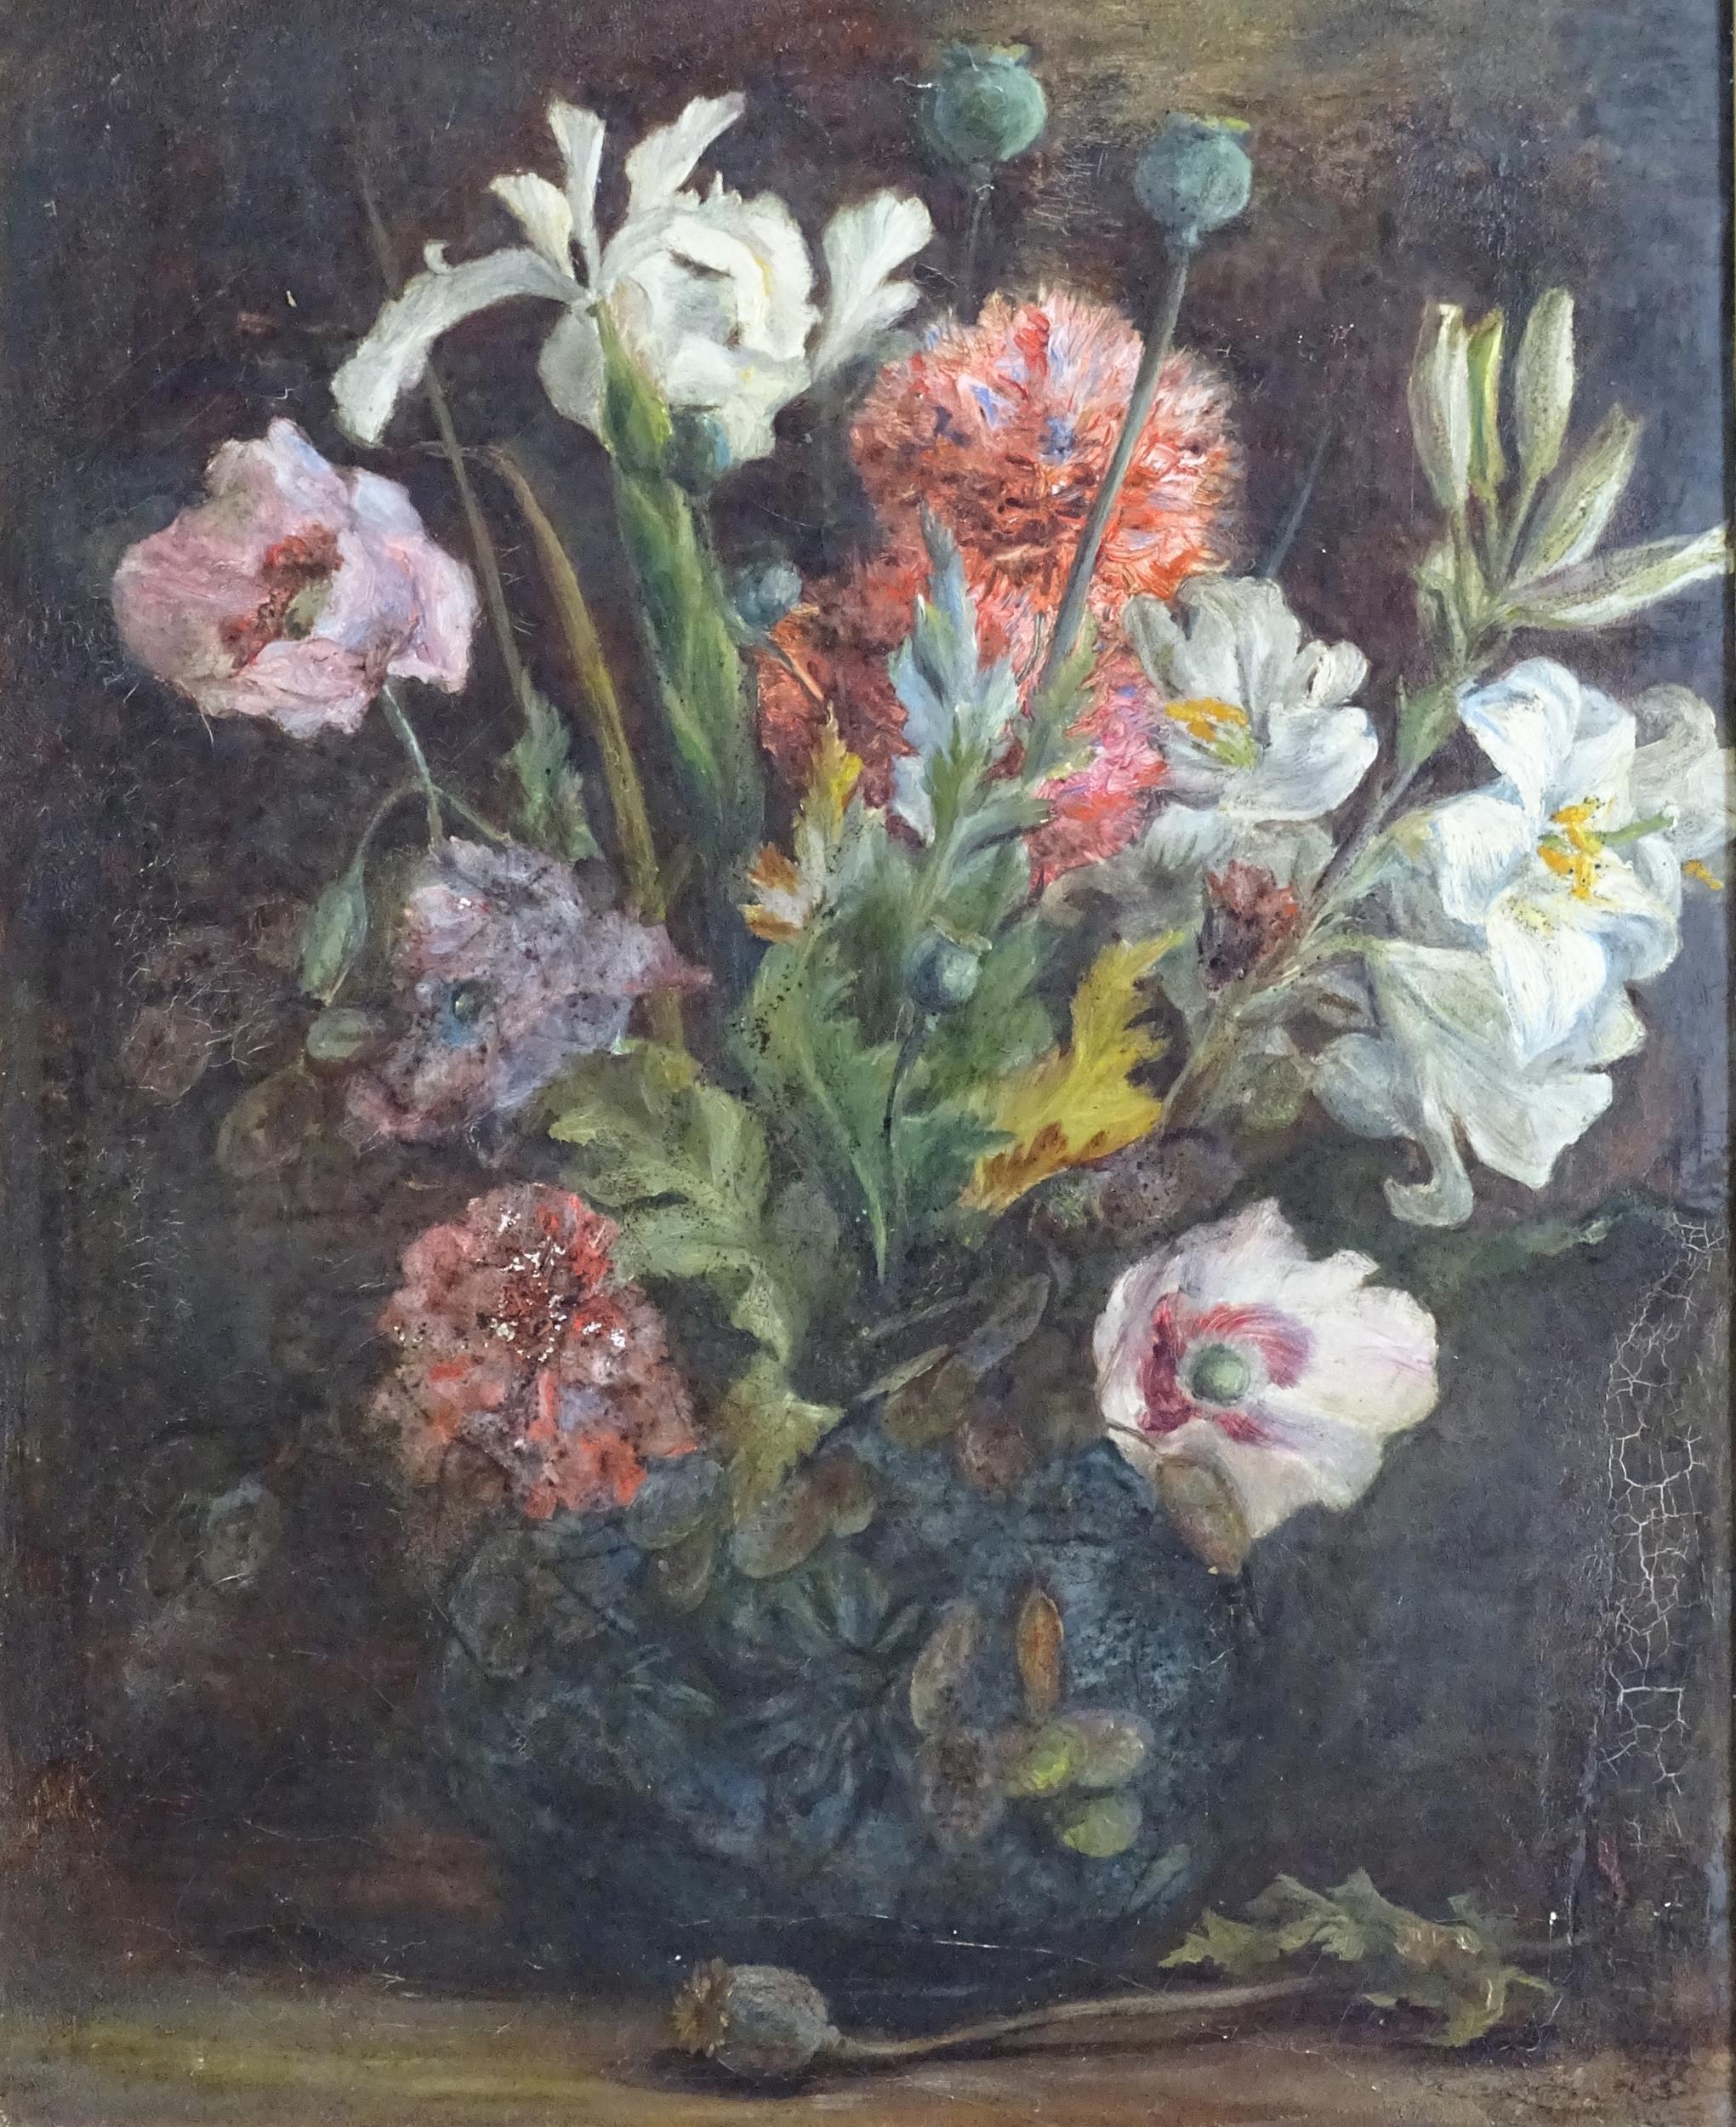 Mary A. Clayton, Late 19th / early 20th century, Oil on canvas, A still life study with flowers in a - Image 4 of 4